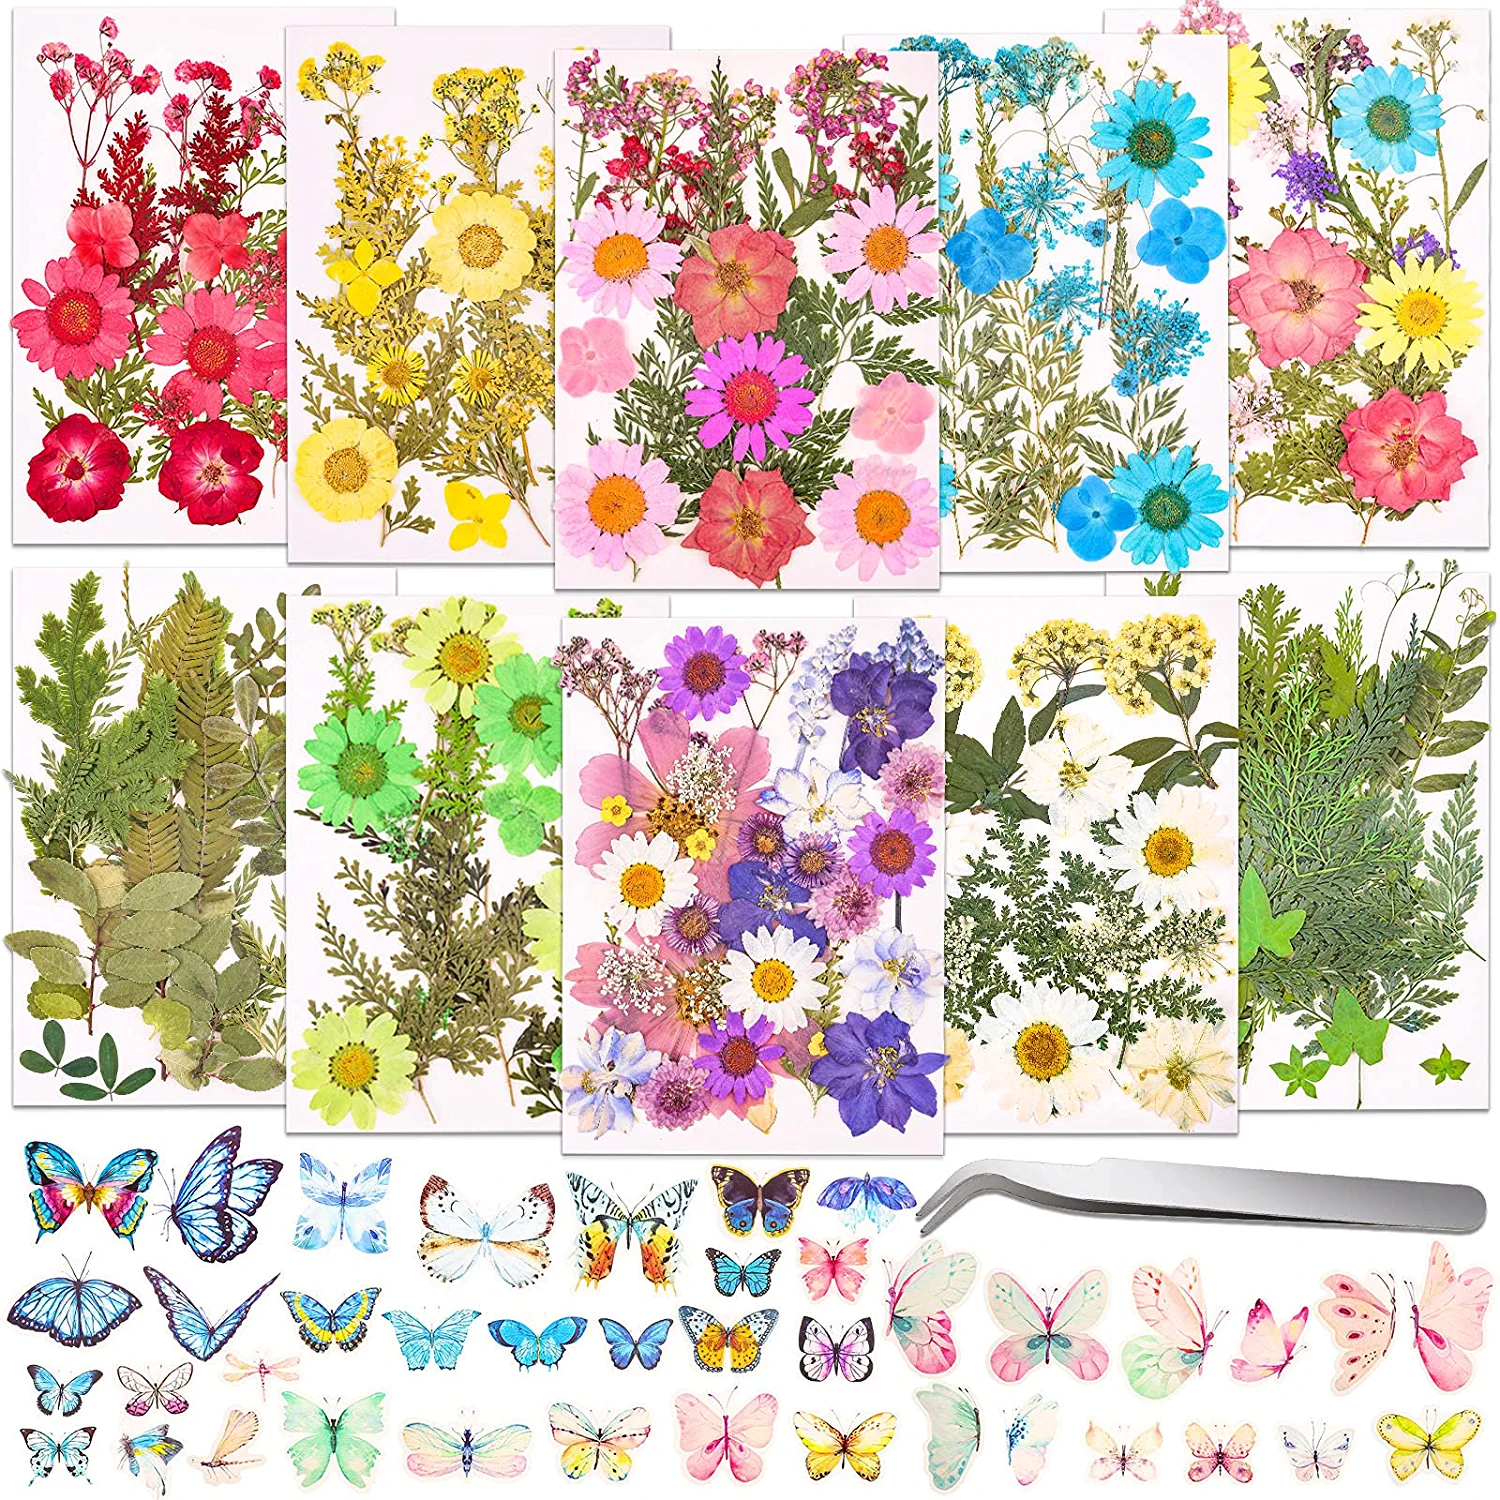 297 Pcs Dried Pressed Flowers Butterfly Stickers For Resin, Real Natural... - $54.99